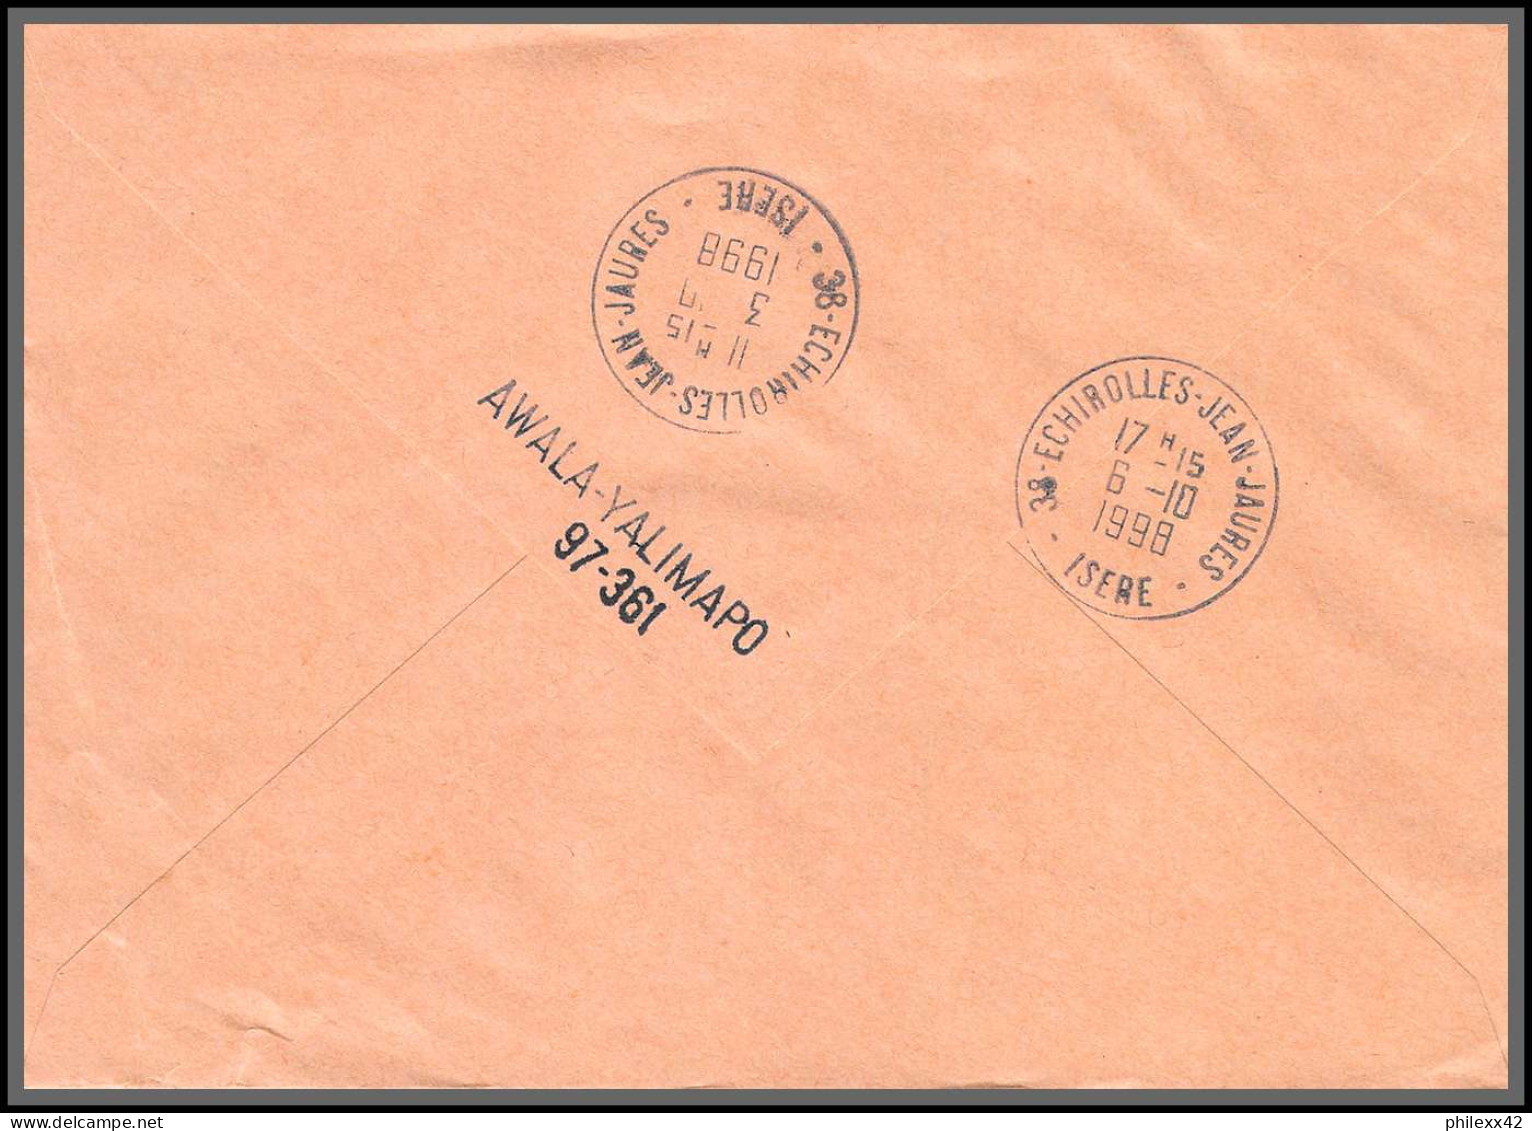 74460 Mixte Briat Luquet Mayotte St Pierre 26/9/1998 Awala-Yalimapo Griffe Guyane Echirolles Isère Lettre Cover Colonies - 1997-2004 Marianna Del 14 Luglio